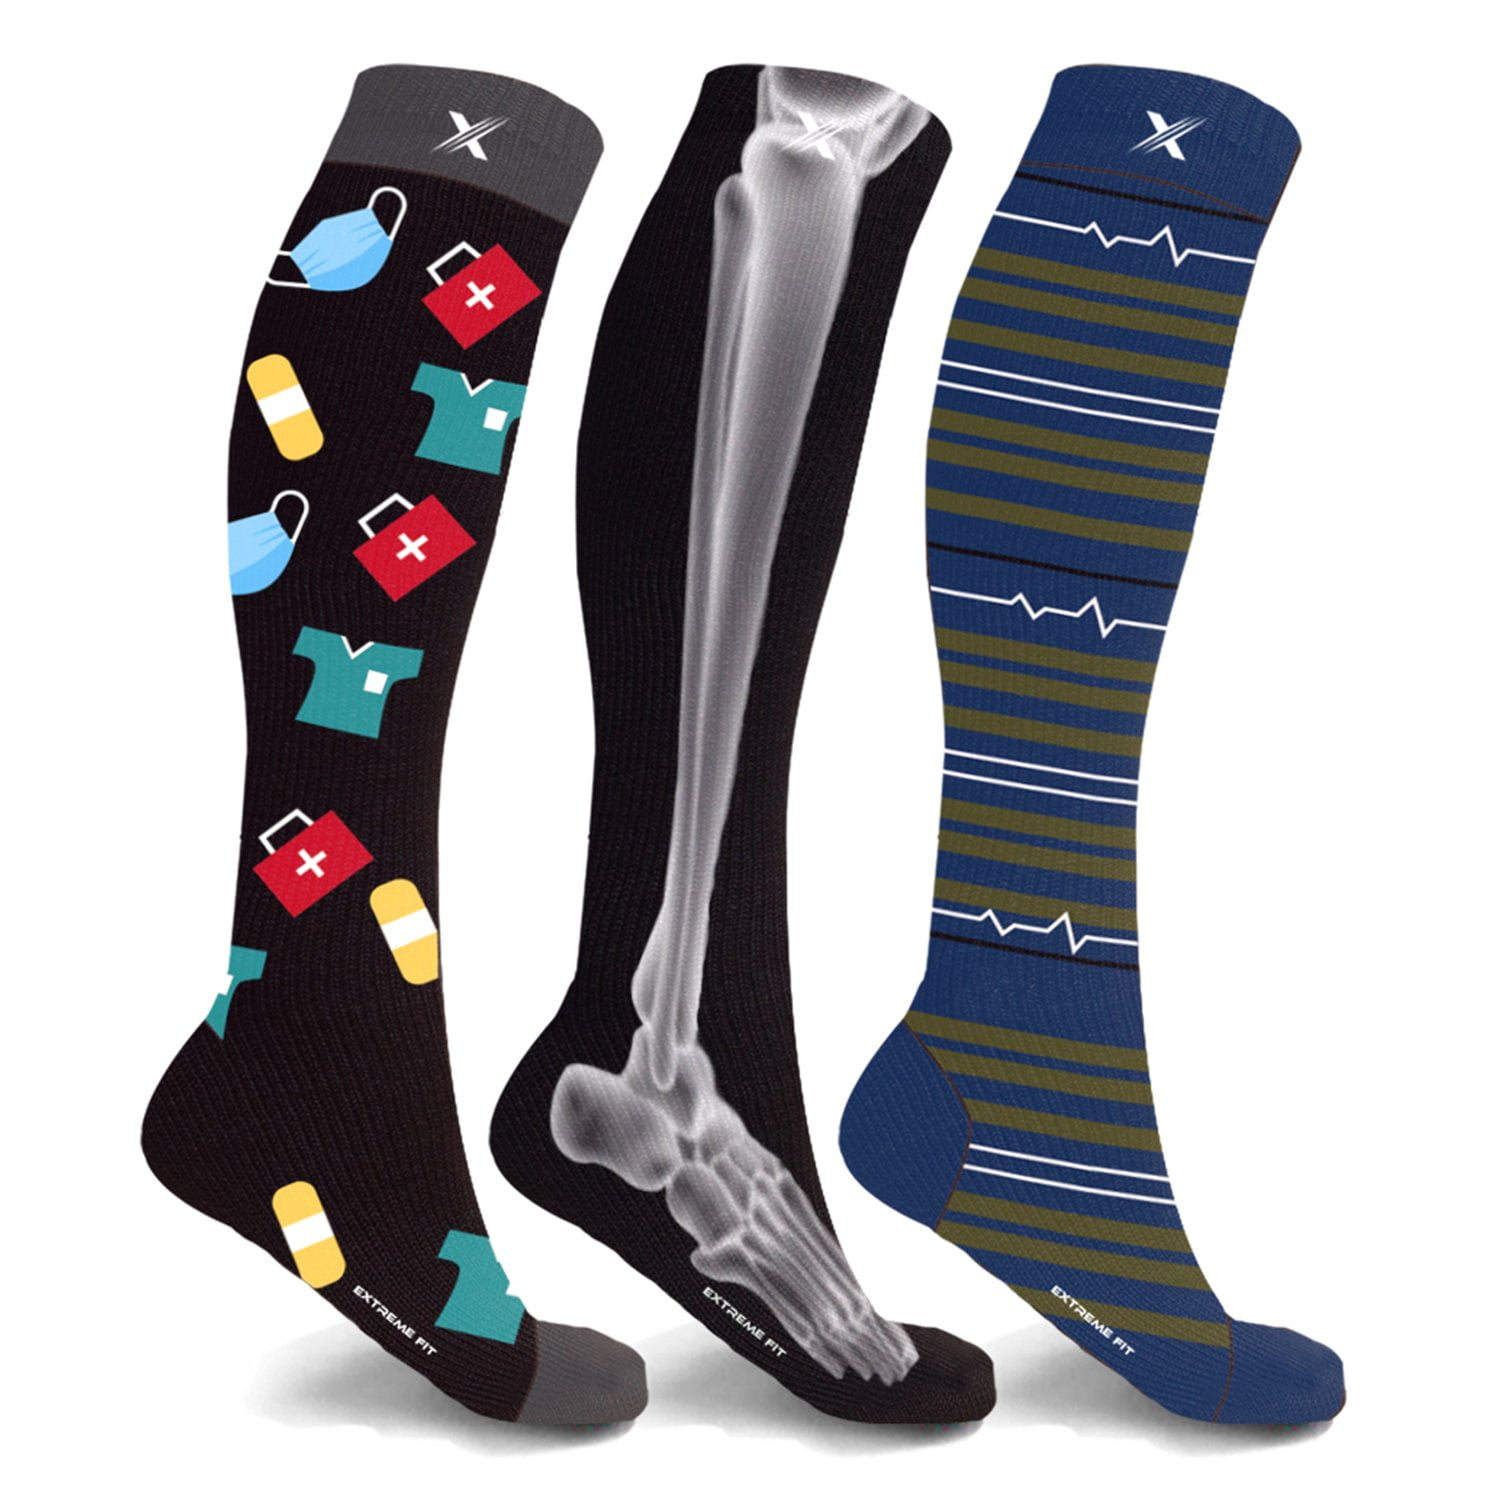 Full Printing Compression Socks Knee High Nurse Pregnant Running Medical  and Travel Athletic - XW03547 - Brilliant Promotional Products